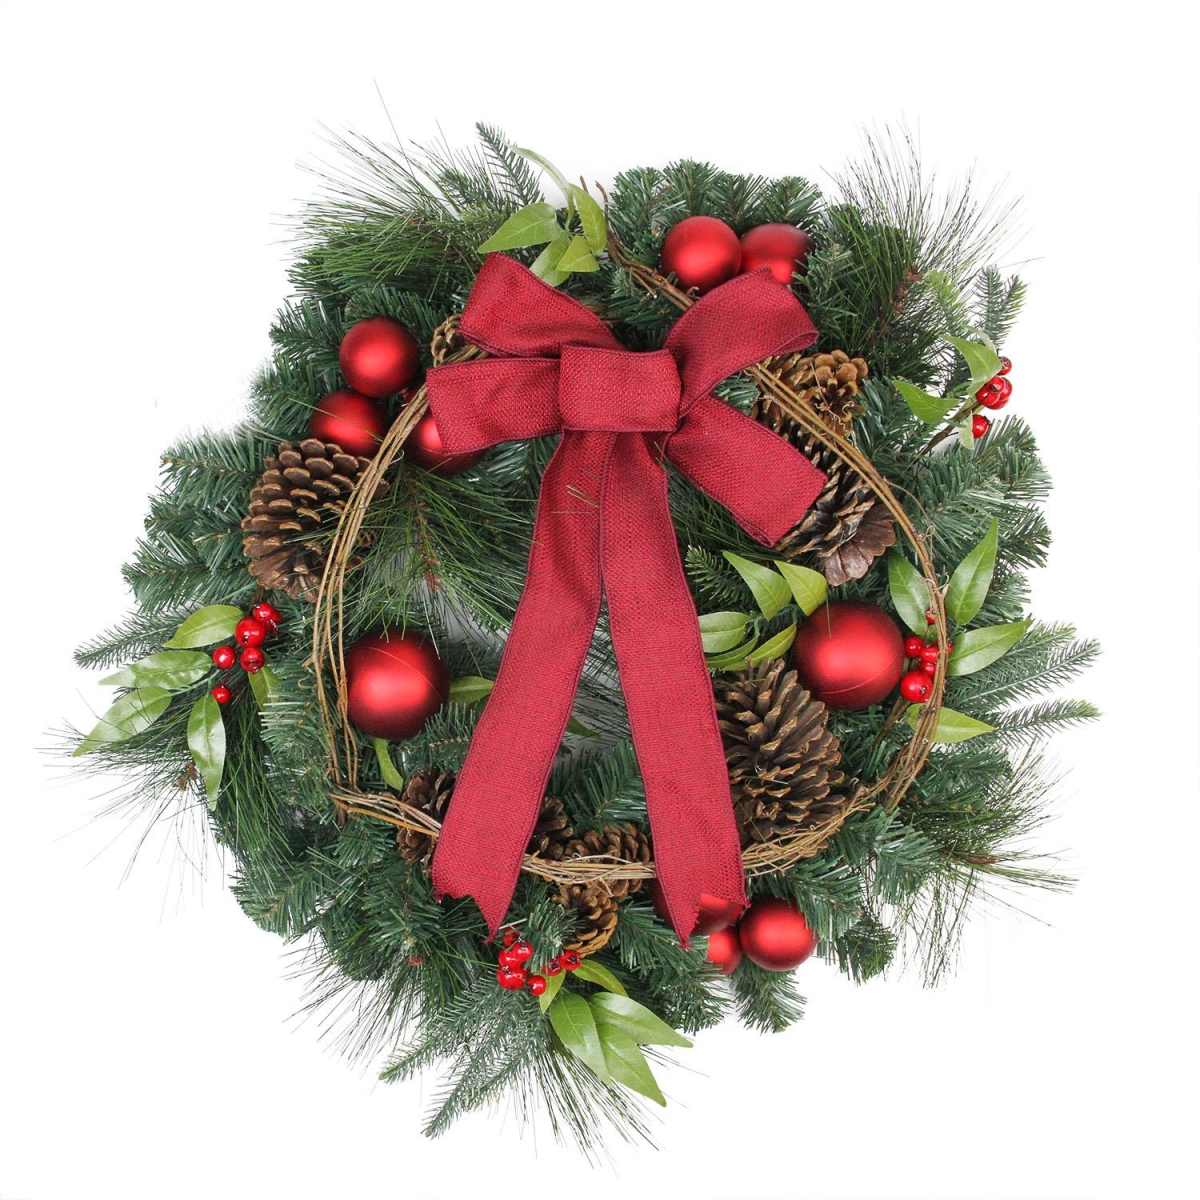 32275664 24 In. Pine With Red Ball Ornaments & Pine Cones Artificial Christmas Wreath - Unlit